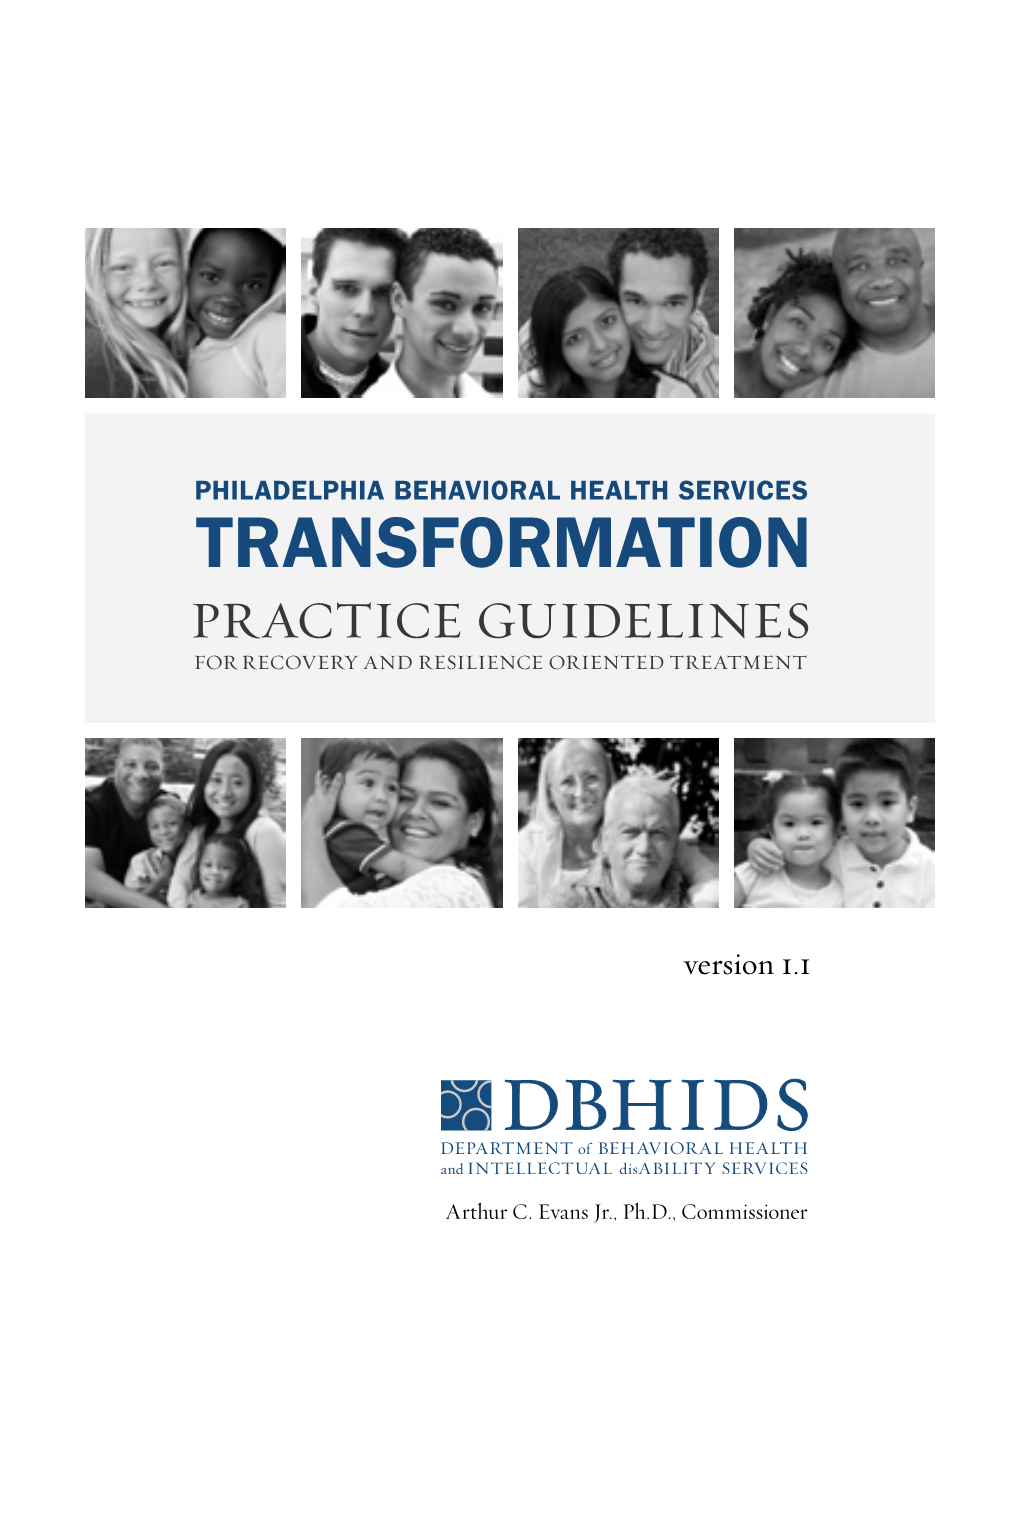 Download the Practice Guidelines